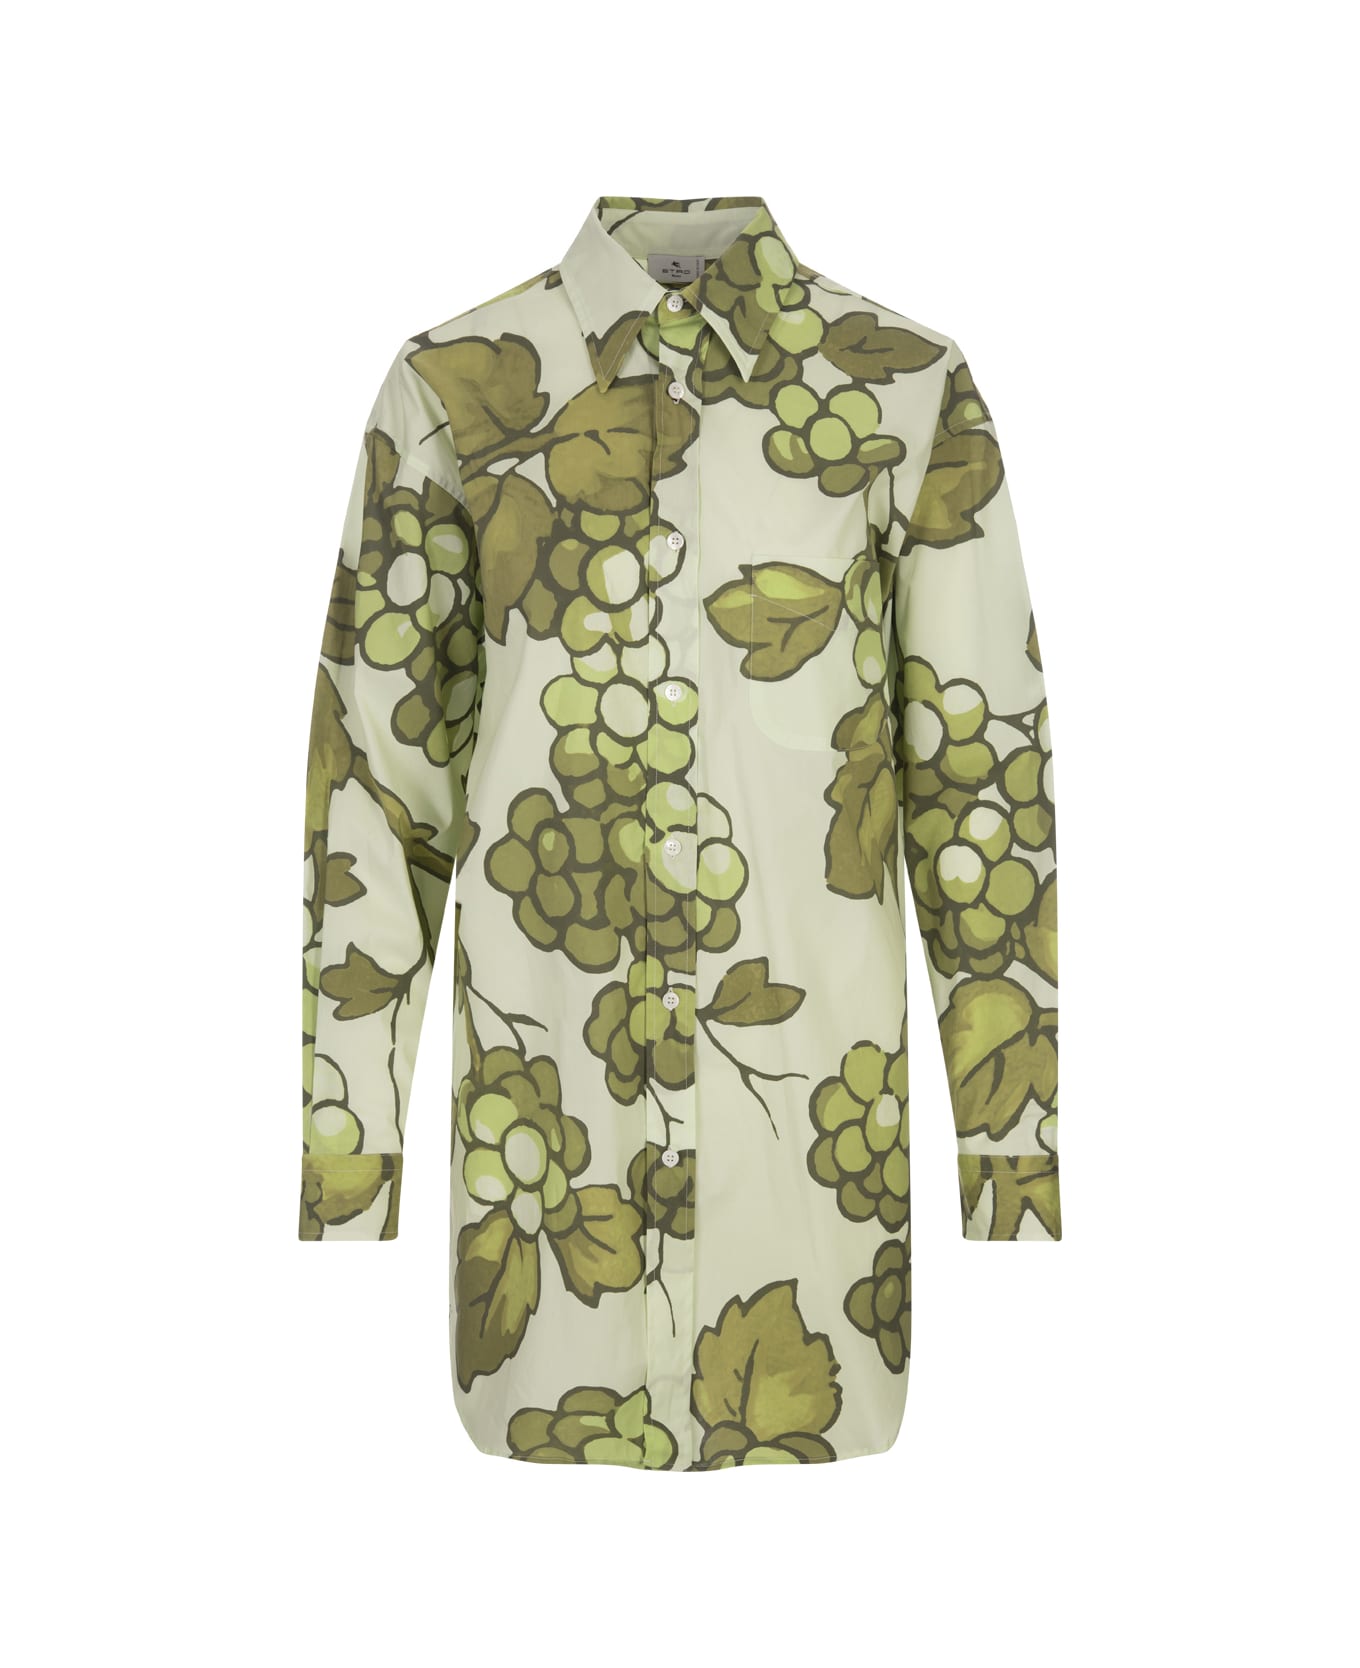 Etro Shirt With Green Barries Print - Verde